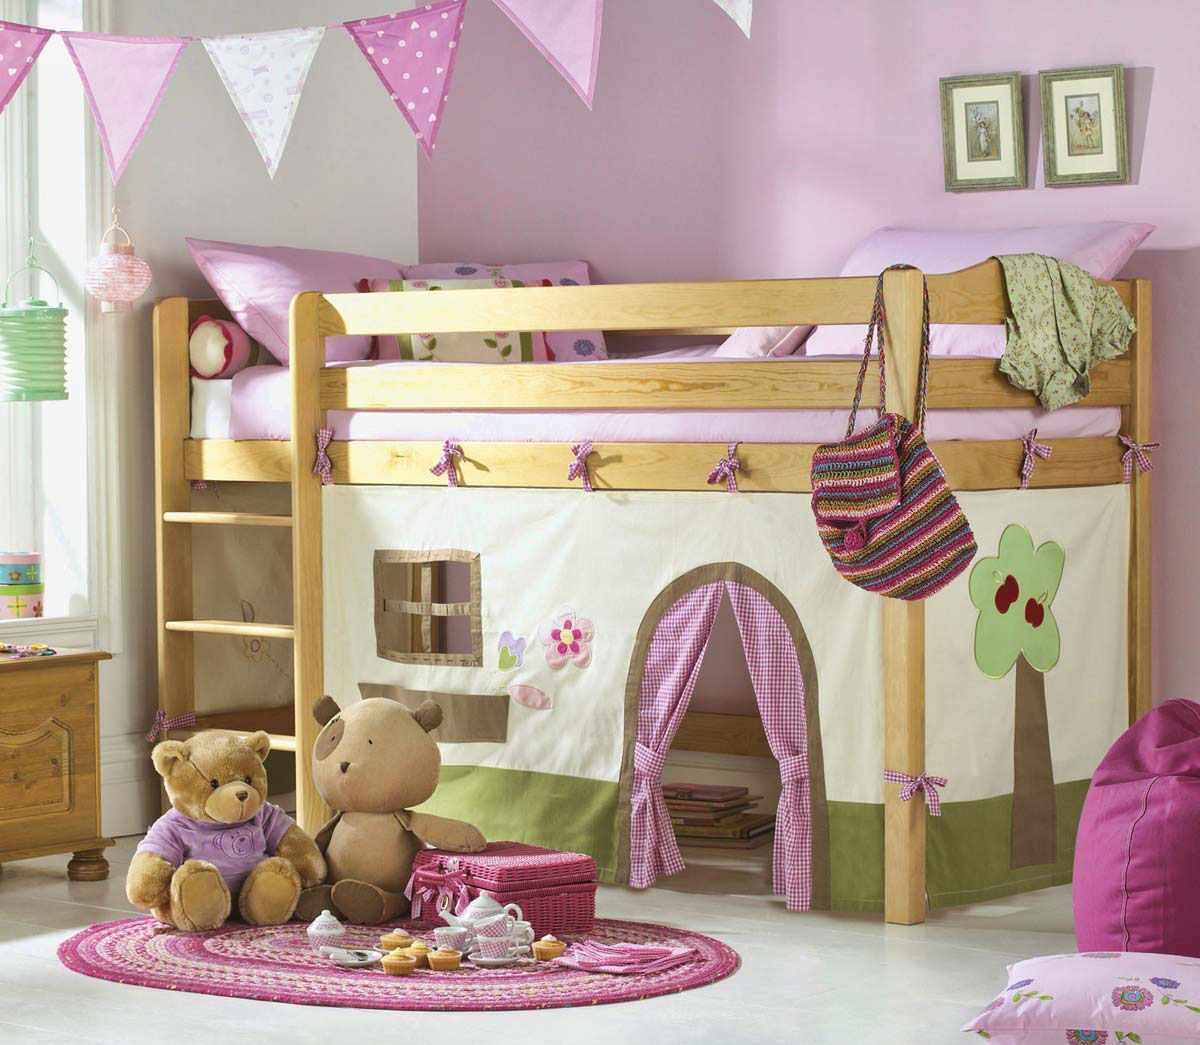 an example of an unusual design of a bedroom for a girl